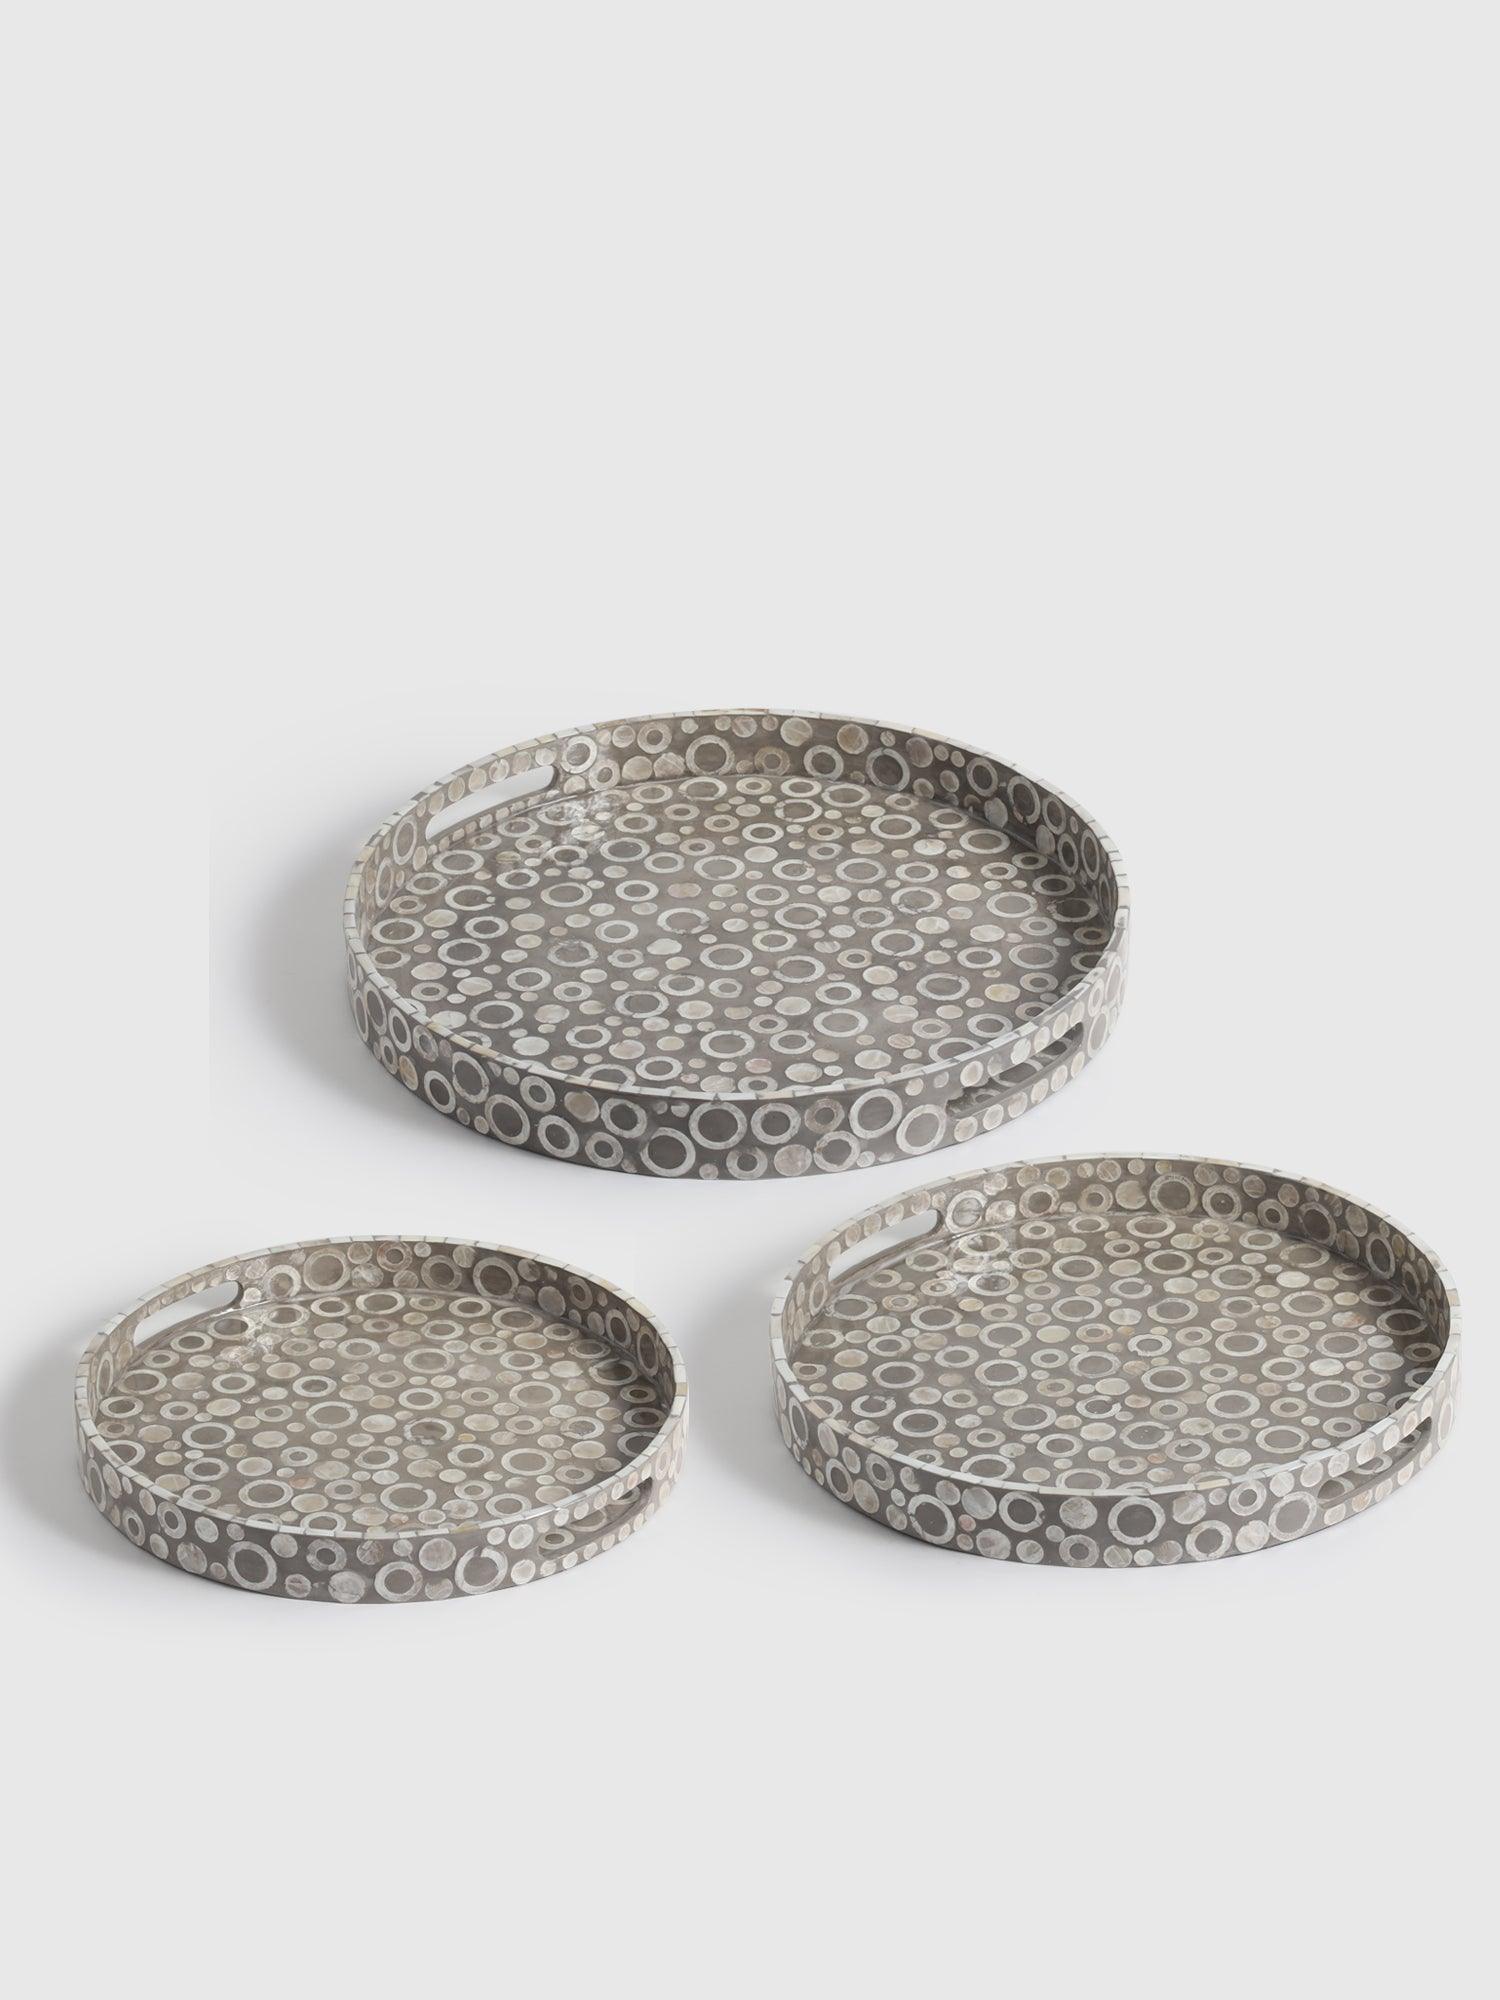 Kass Pearl Tray set of 3